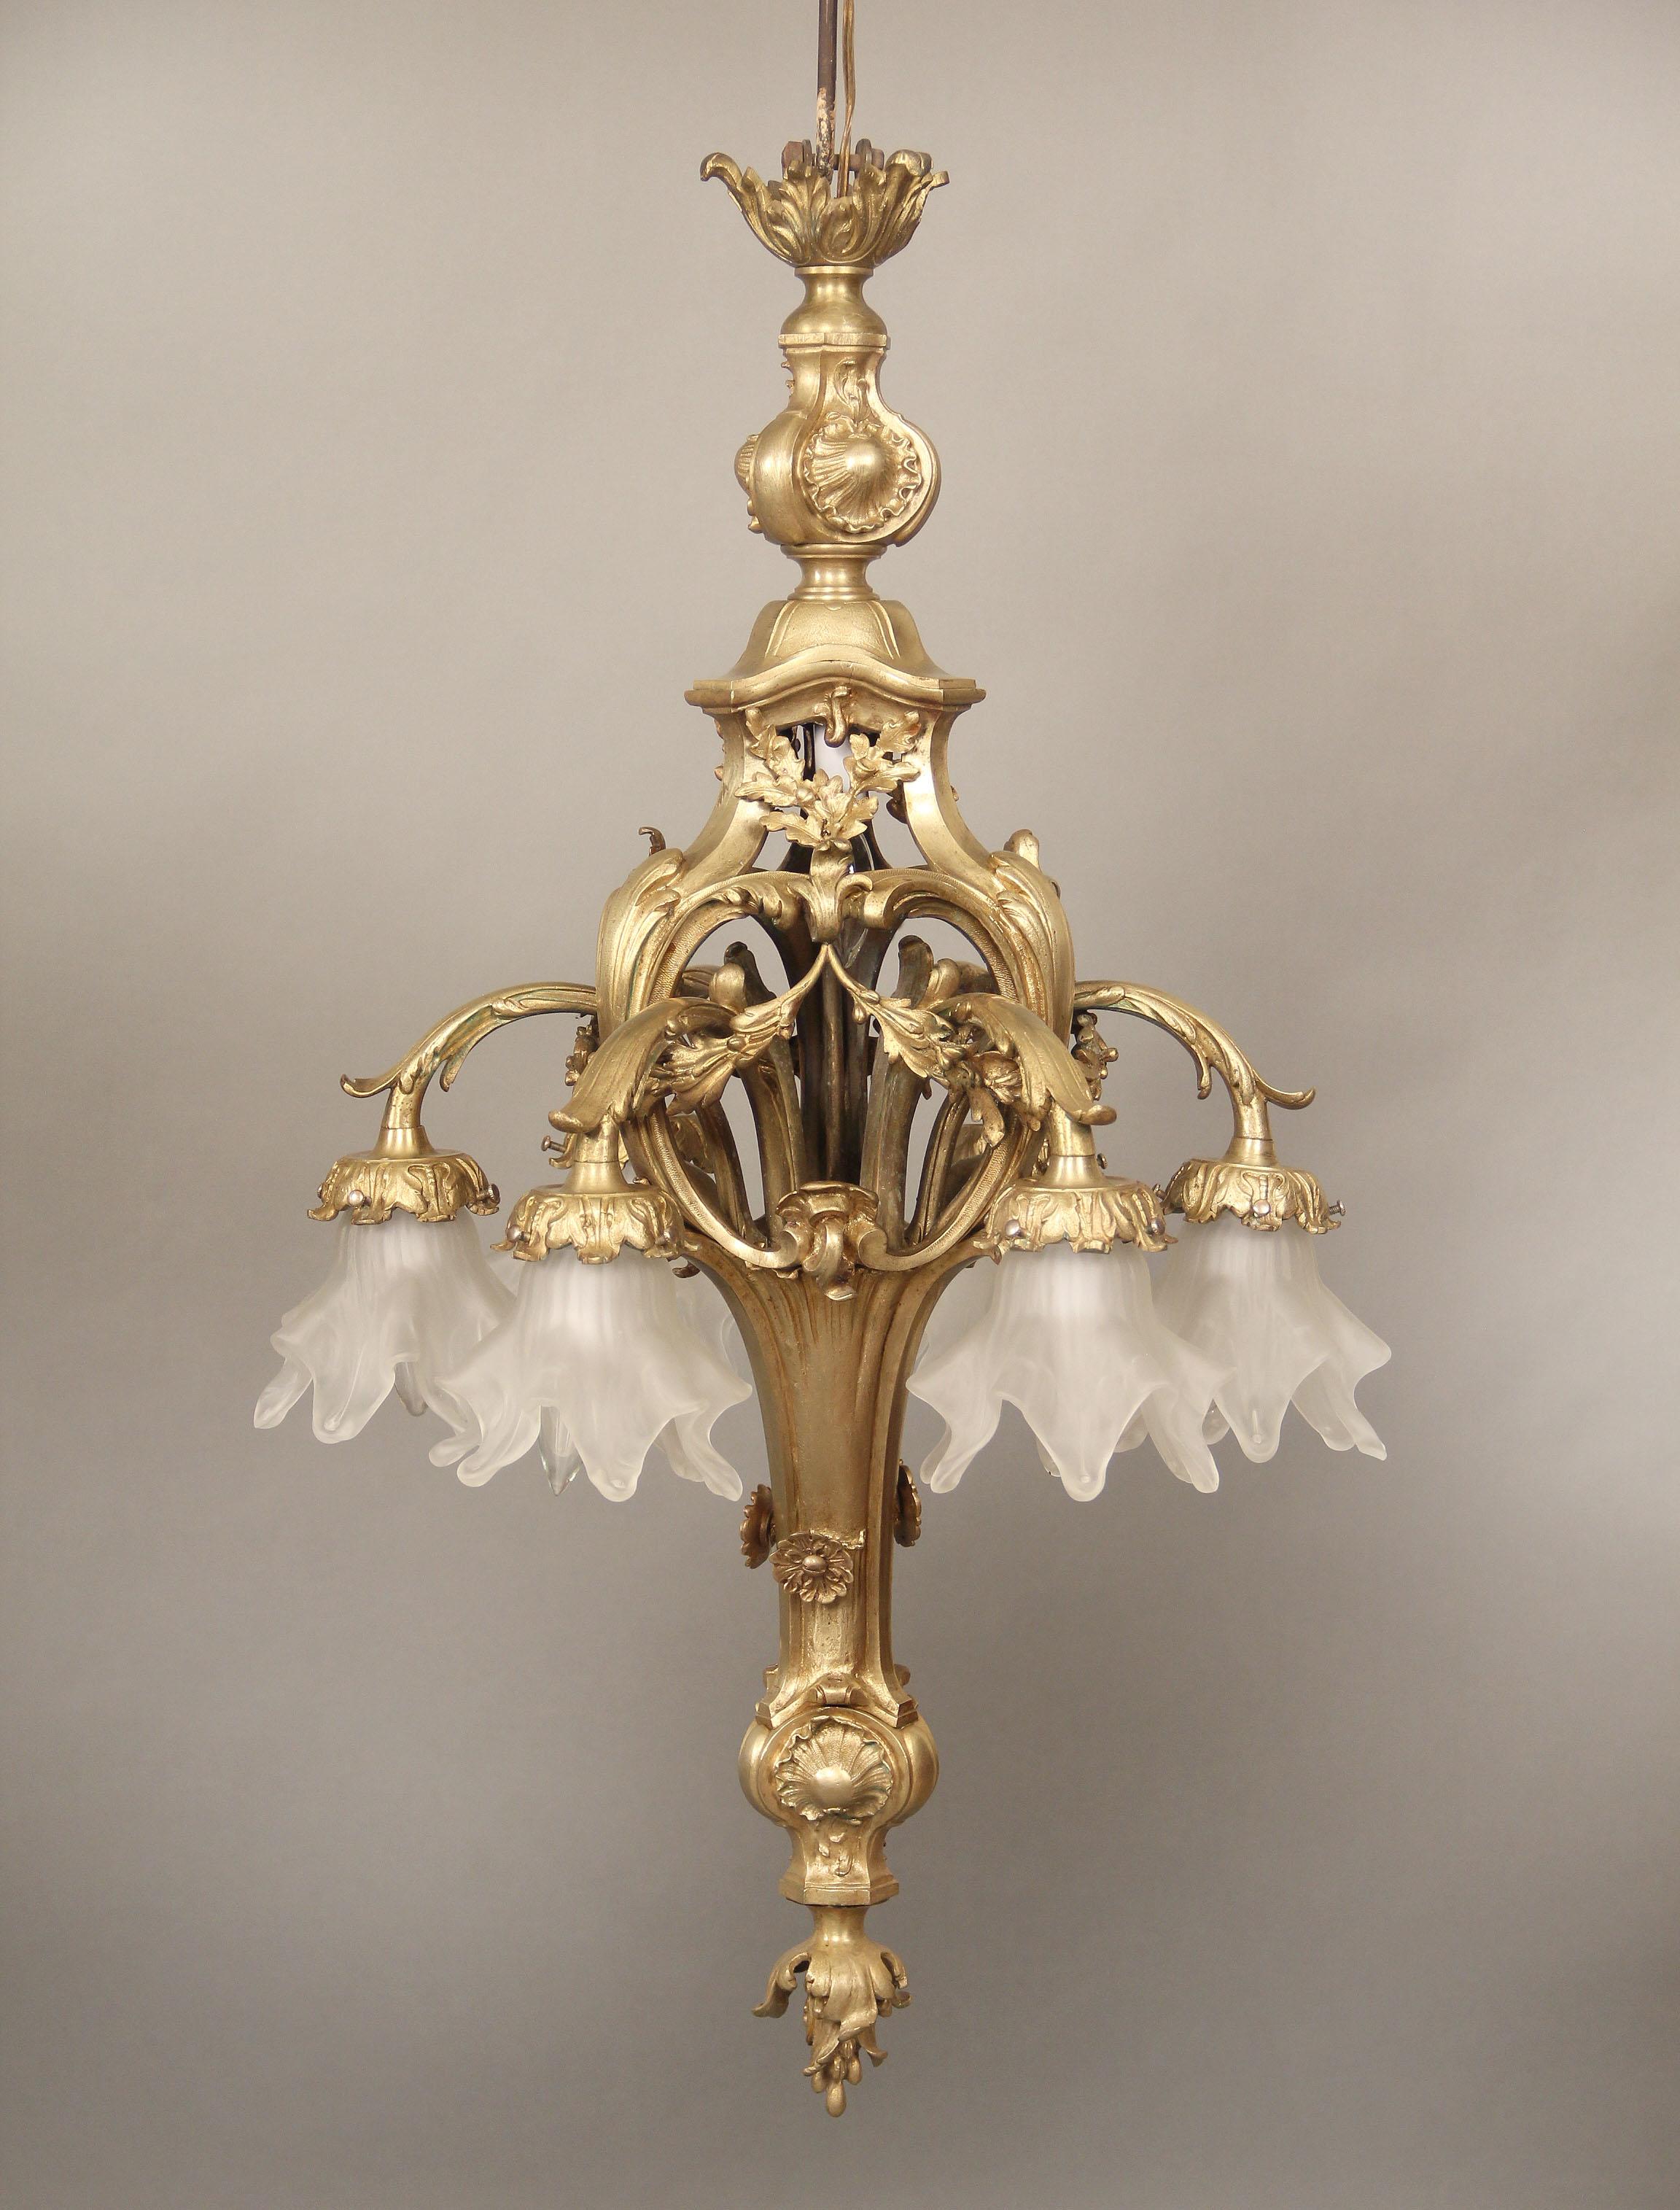 An Interesting Early 20th Century Gilt Bronze Six Light Chandelier

The body and arms designed with bronze acanthus leaves, six downward facing perimeter lights with rose shades.